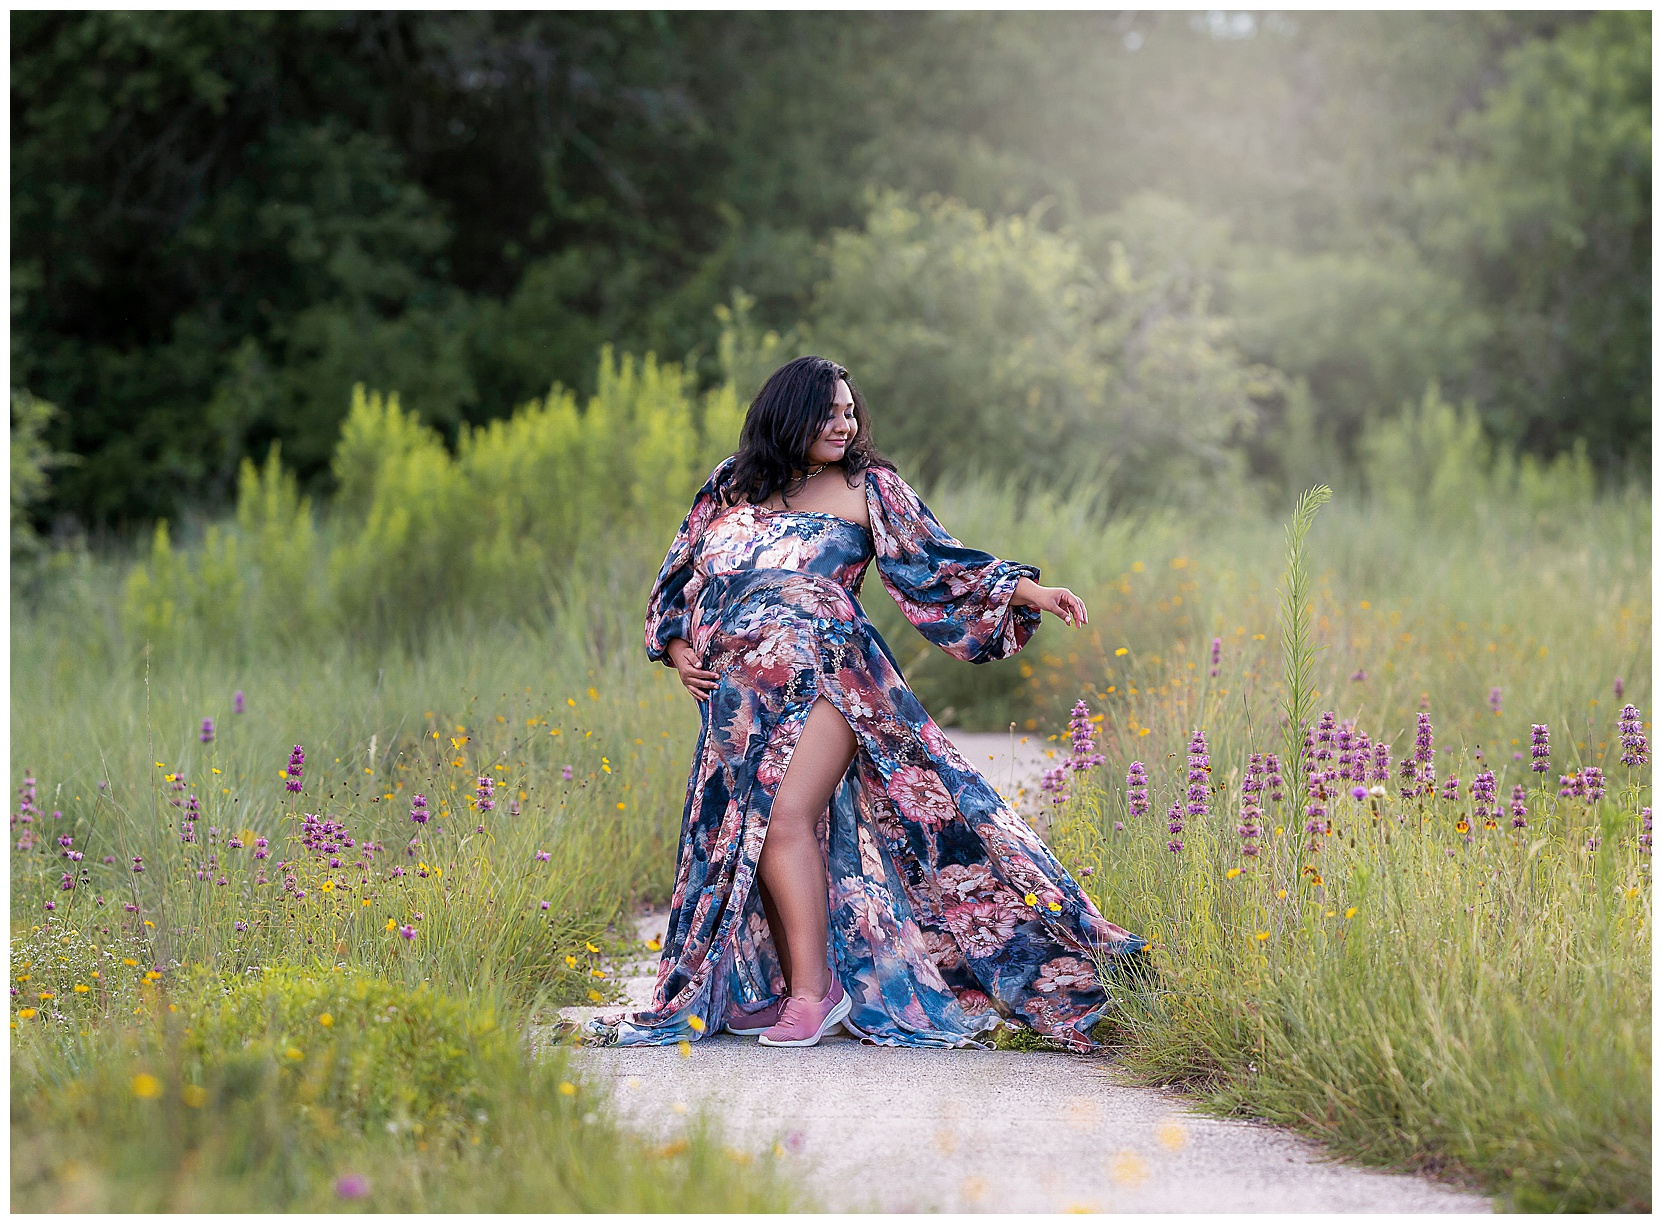 A color Texas wildflower maternity photo featuring a woman in a blue and pink floral dress and pink sneakers standing in a walkway surrounded by wildflowers.